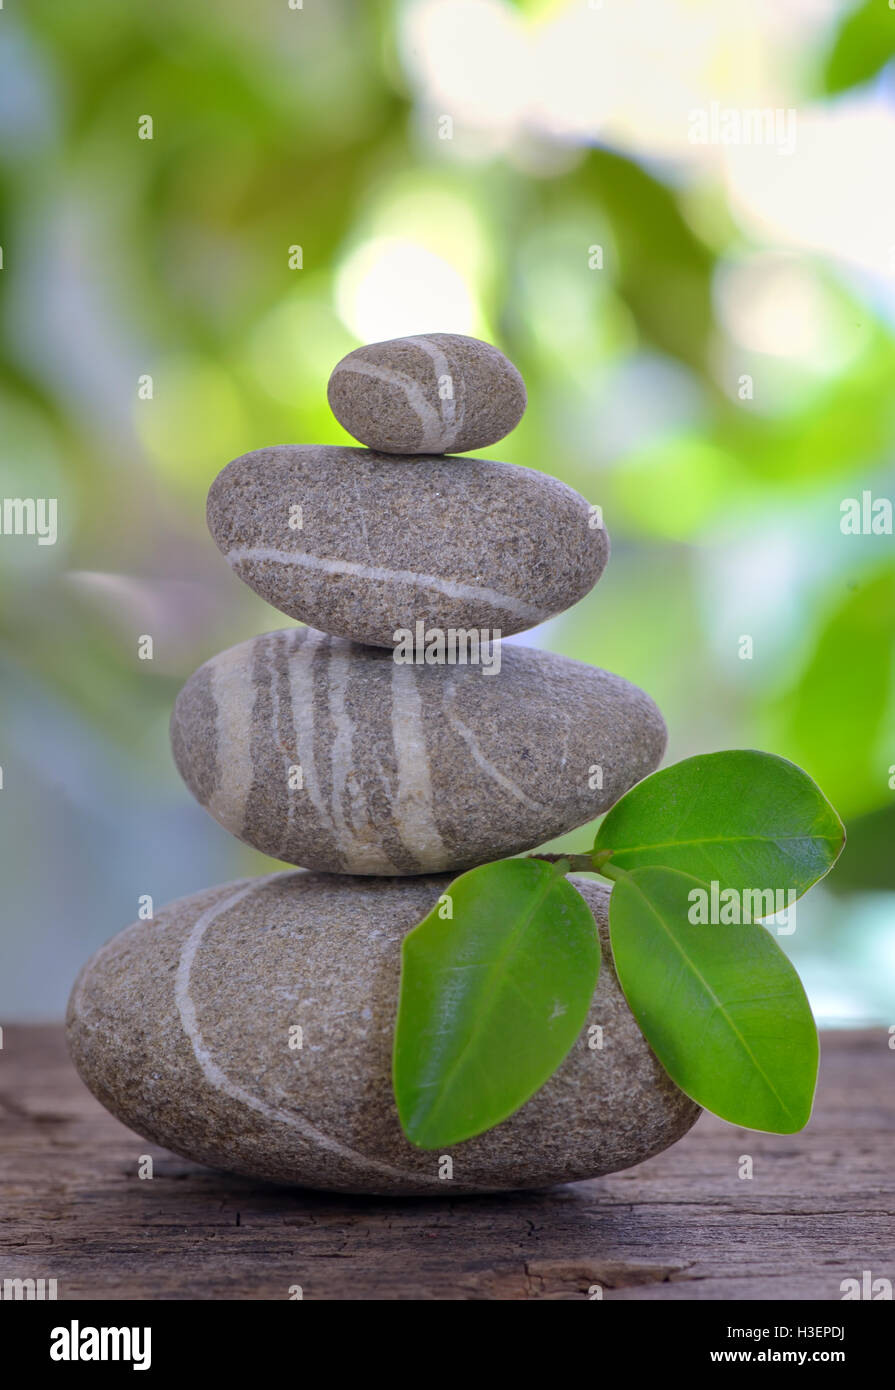 Balanced pebbles isolated on wooden table Stock Photo